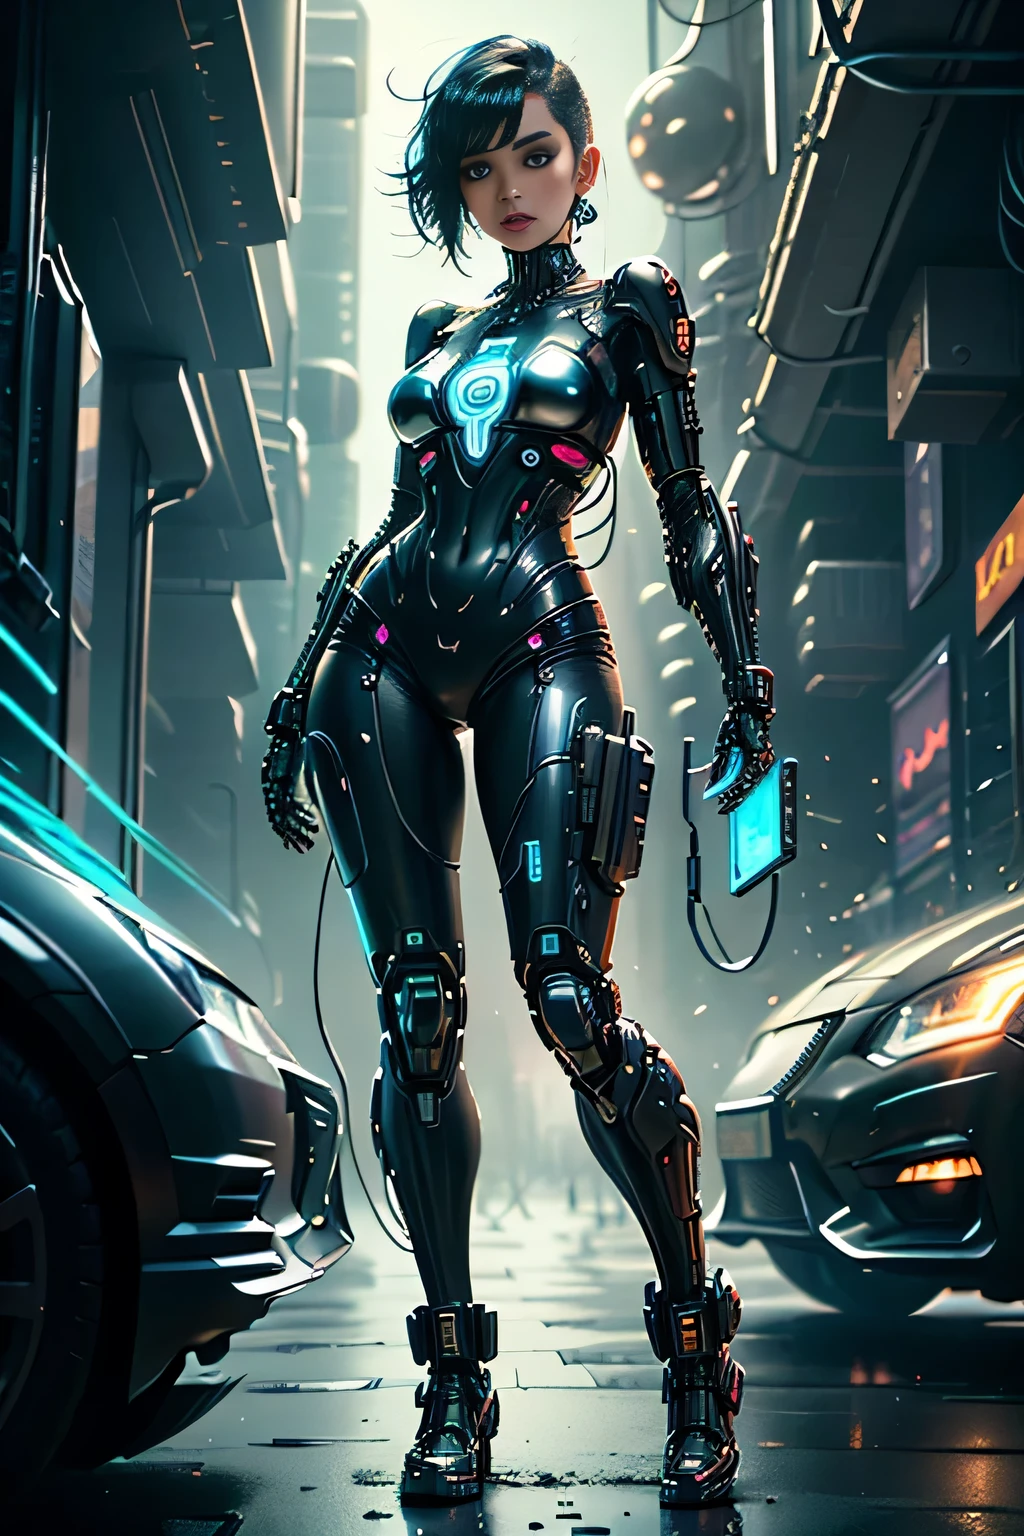 Cyberwoman Hall in Cyberpunk City of the Future々and cyberpunk women, with a full body on display, is depicted in a futuristic cyberpunk city. His eyes sparkle with intense neon, reflecting the cityscape filled with dystopian skyscrapers, holographic advertisements and flying vehicles amid a night sky lit by vibrant neons. The cybernetic woman sports a shiny metallic skin, covered in intricate cybernetic details and circuit tattoos. His posture is confident、Challenging